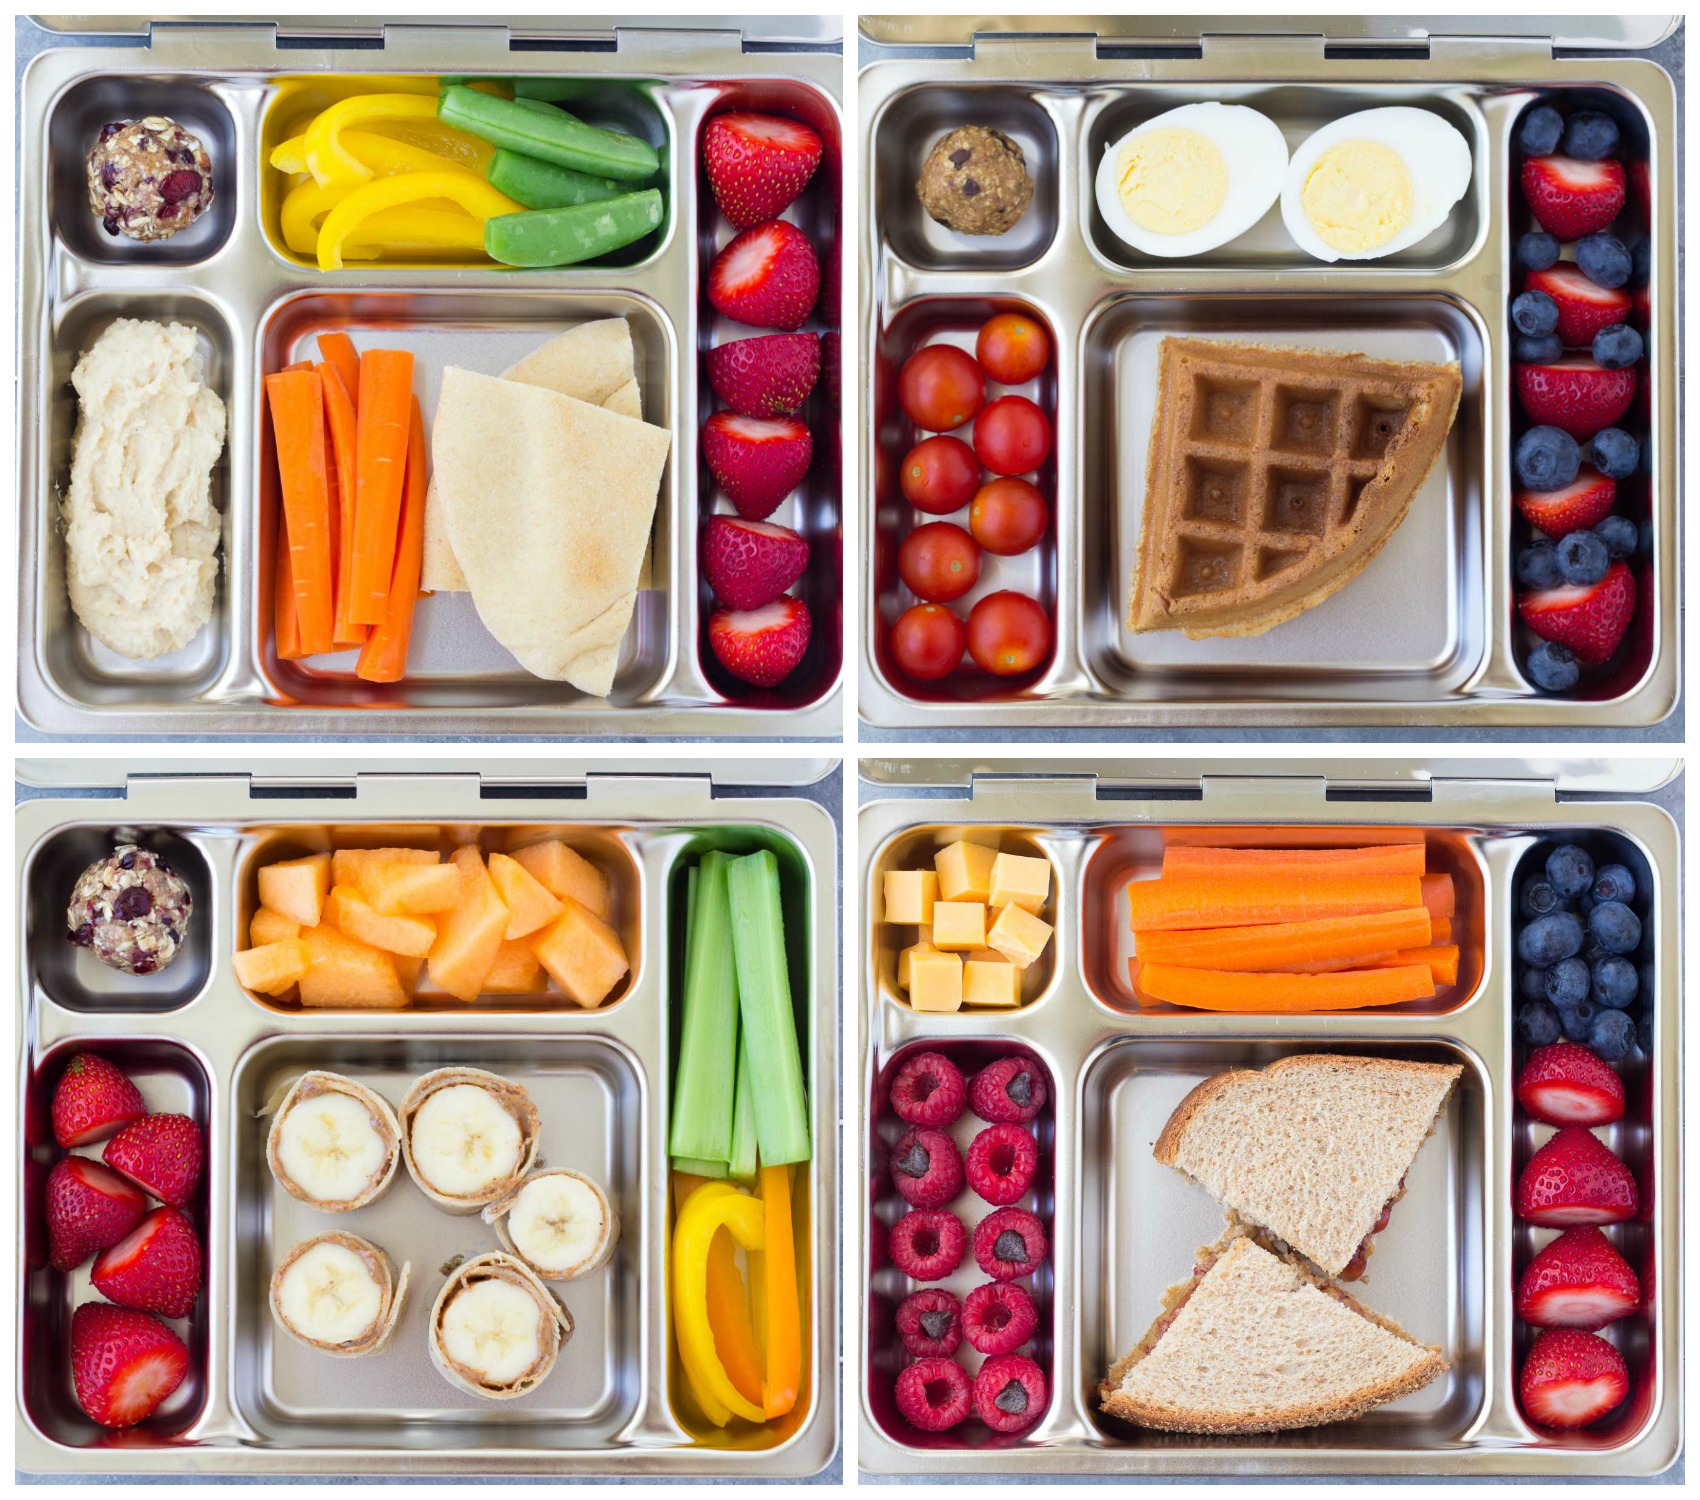 10 Healthy School Lunches for Kids - Kristine's Kitchen